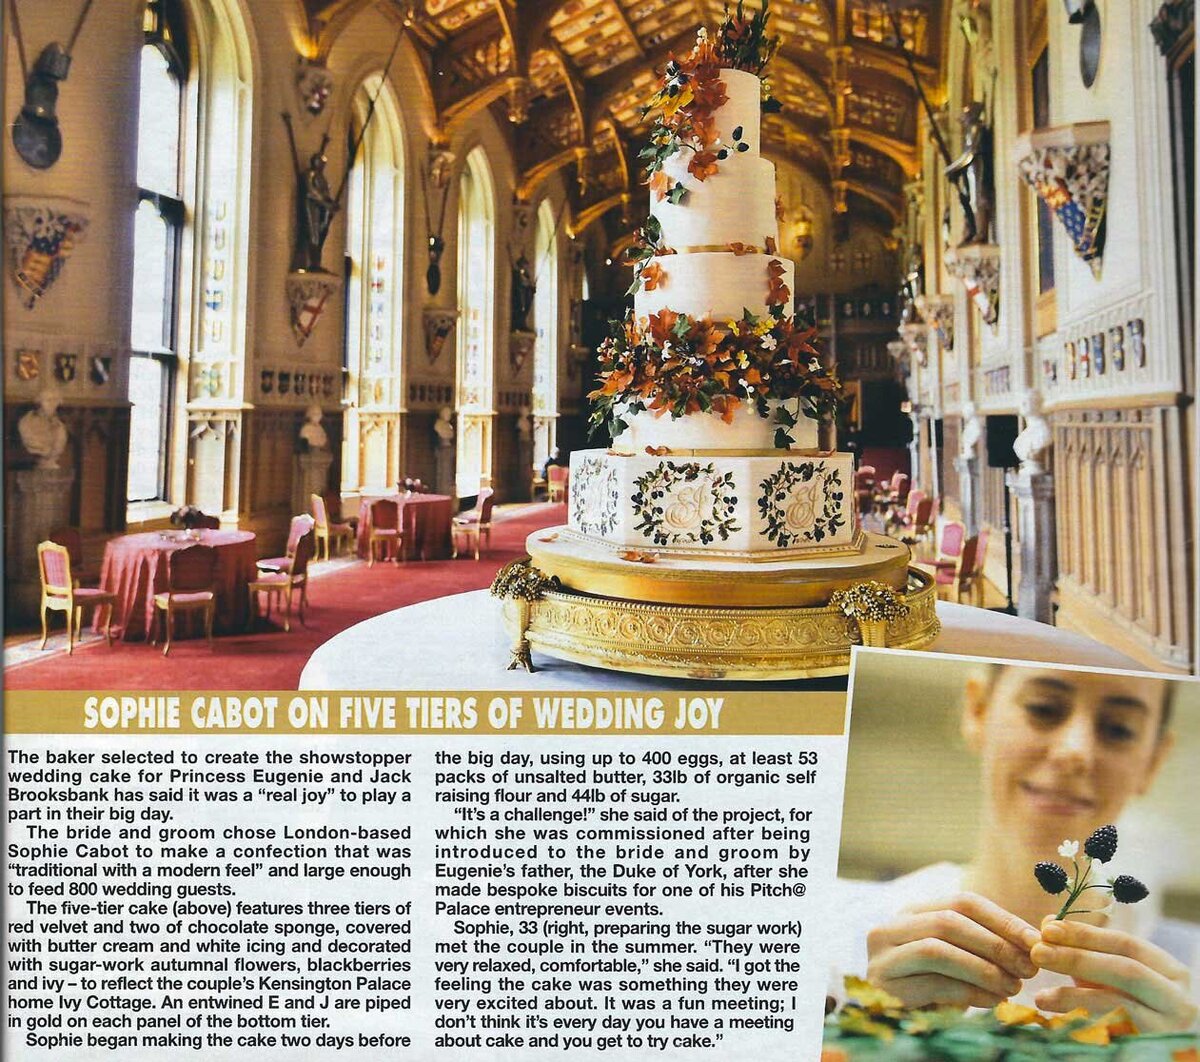 Magazine Article titled "Sophie Cabot on five tiers of wedding joy"